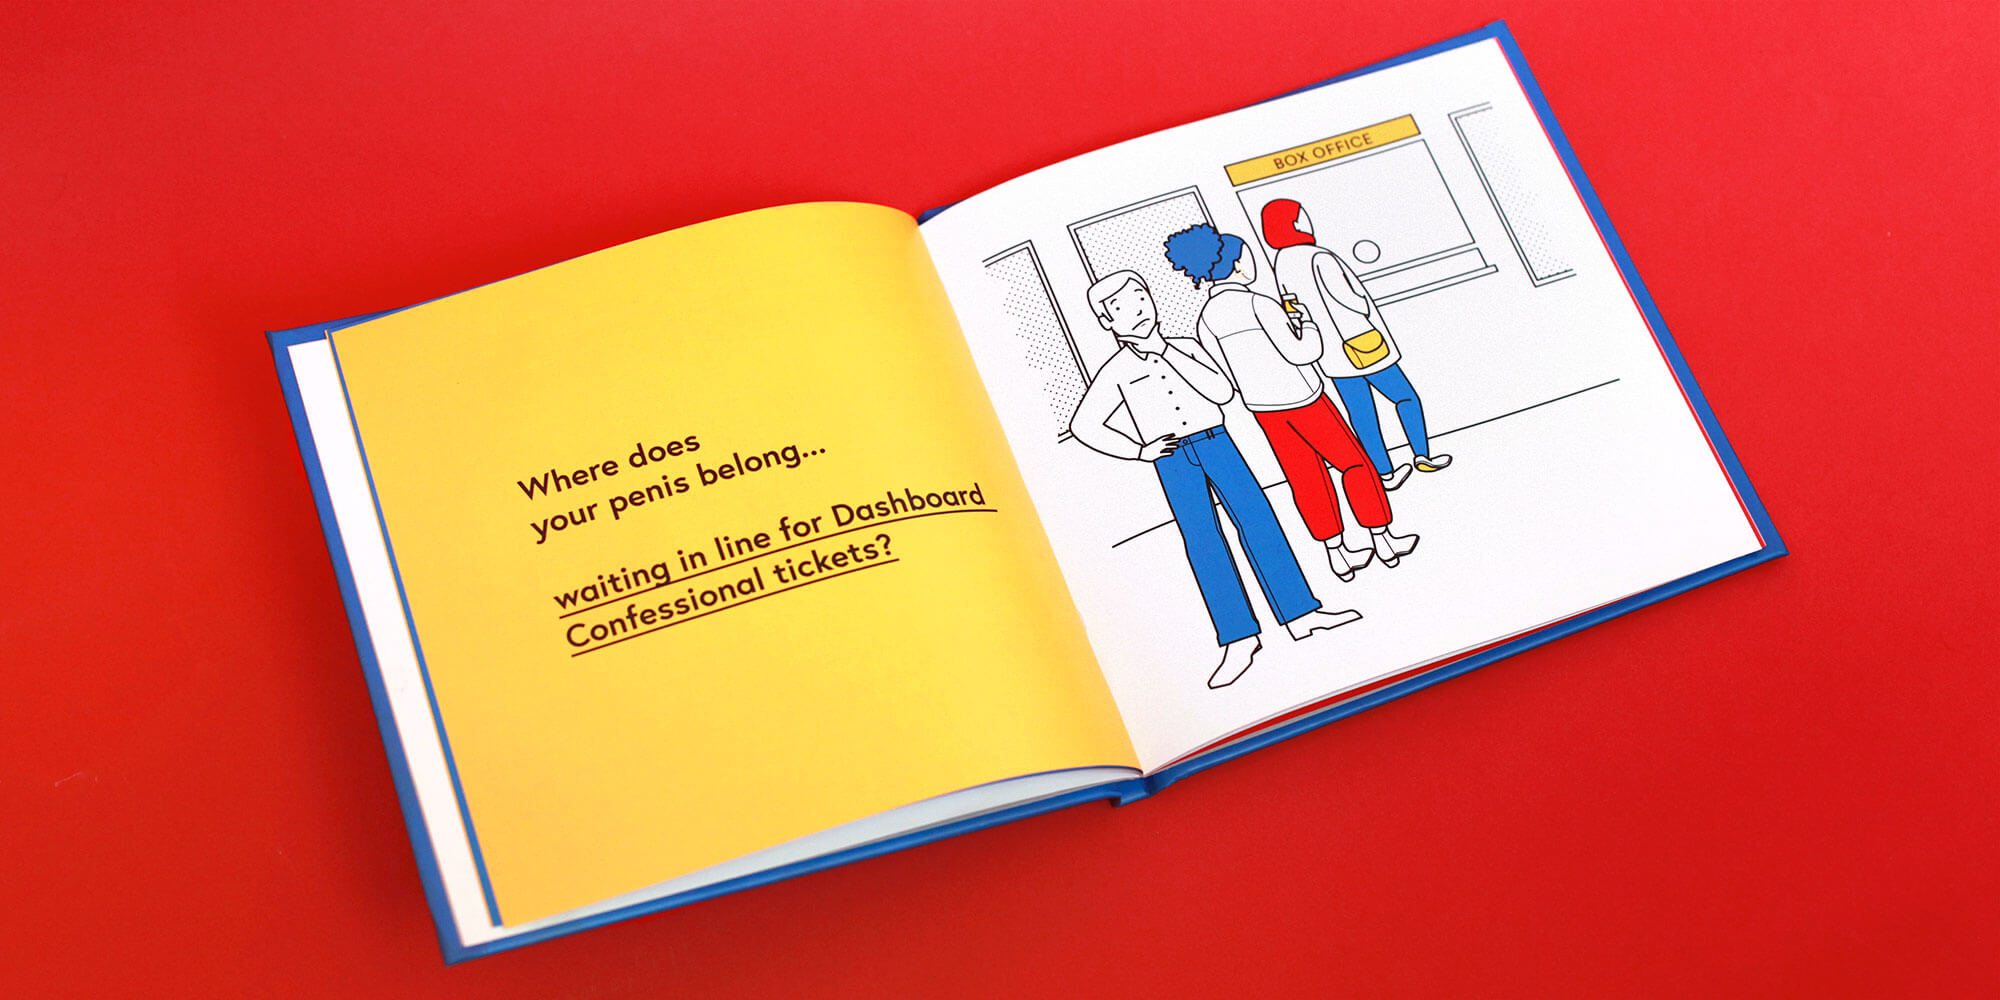 A photograph of the book 'Where Does Your Penis Belog?' open to the page where the character is deciding where his penis belongs while in line for concert tickets